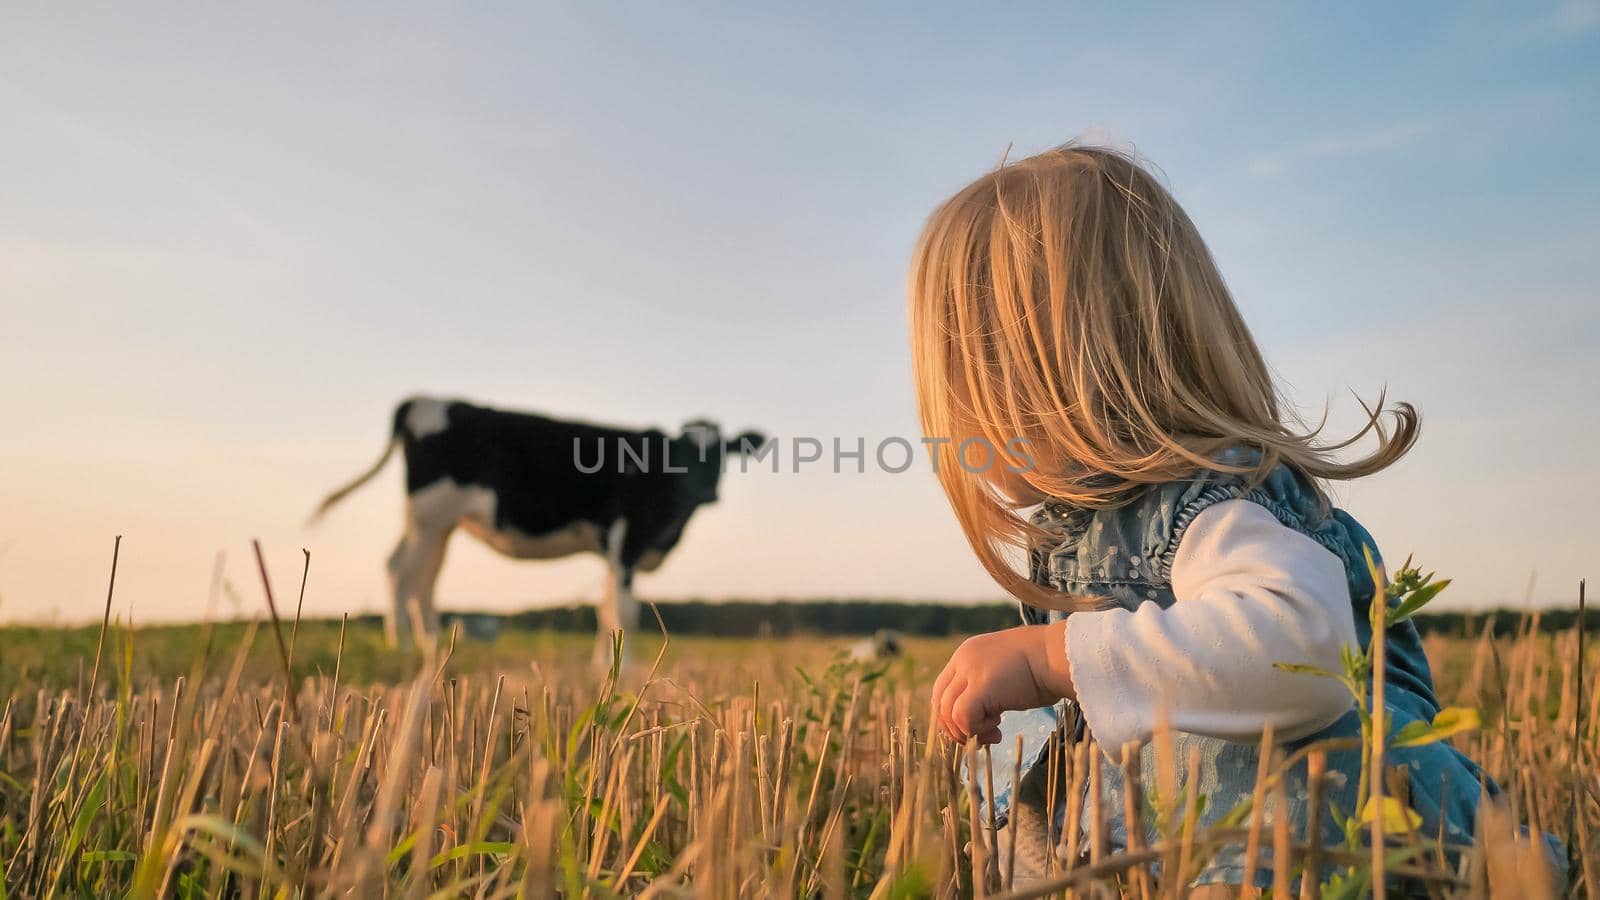 A little girl looks at a young cow in a field on a warm summer evening